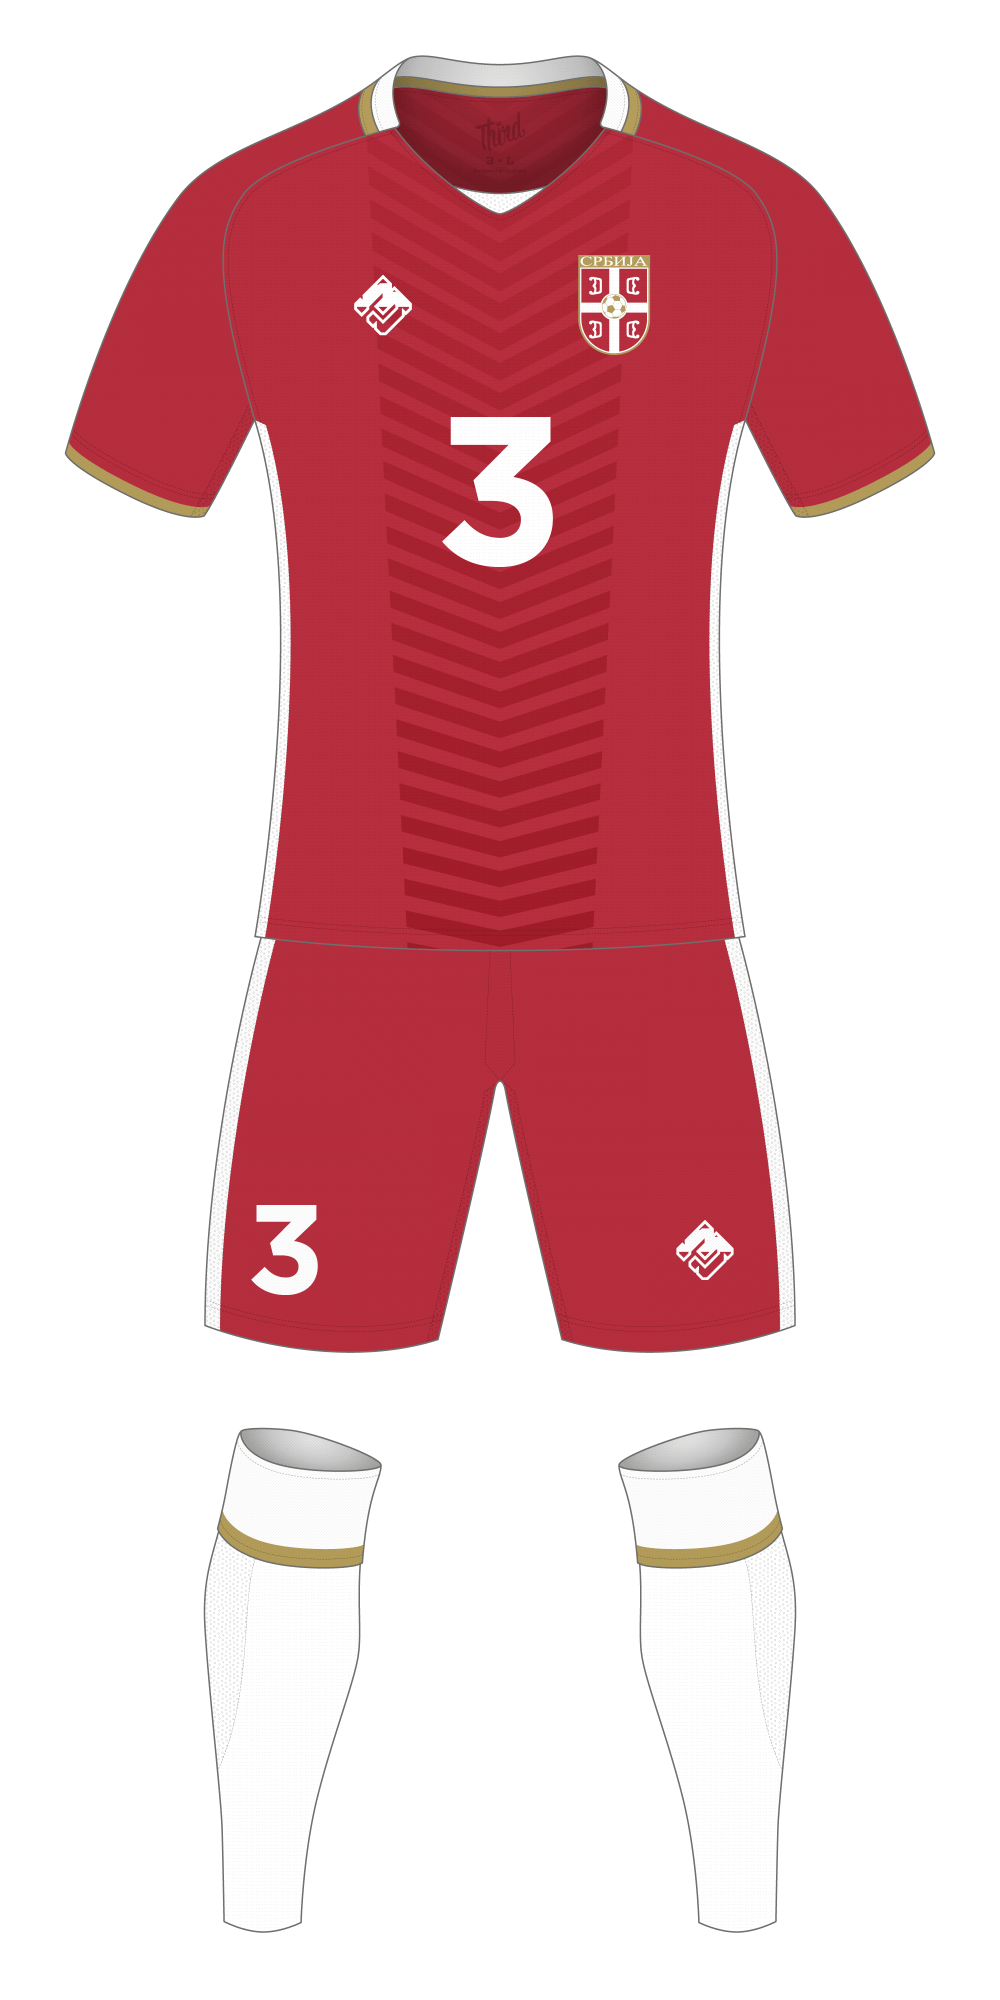 Serbia World Cup 2018 concept